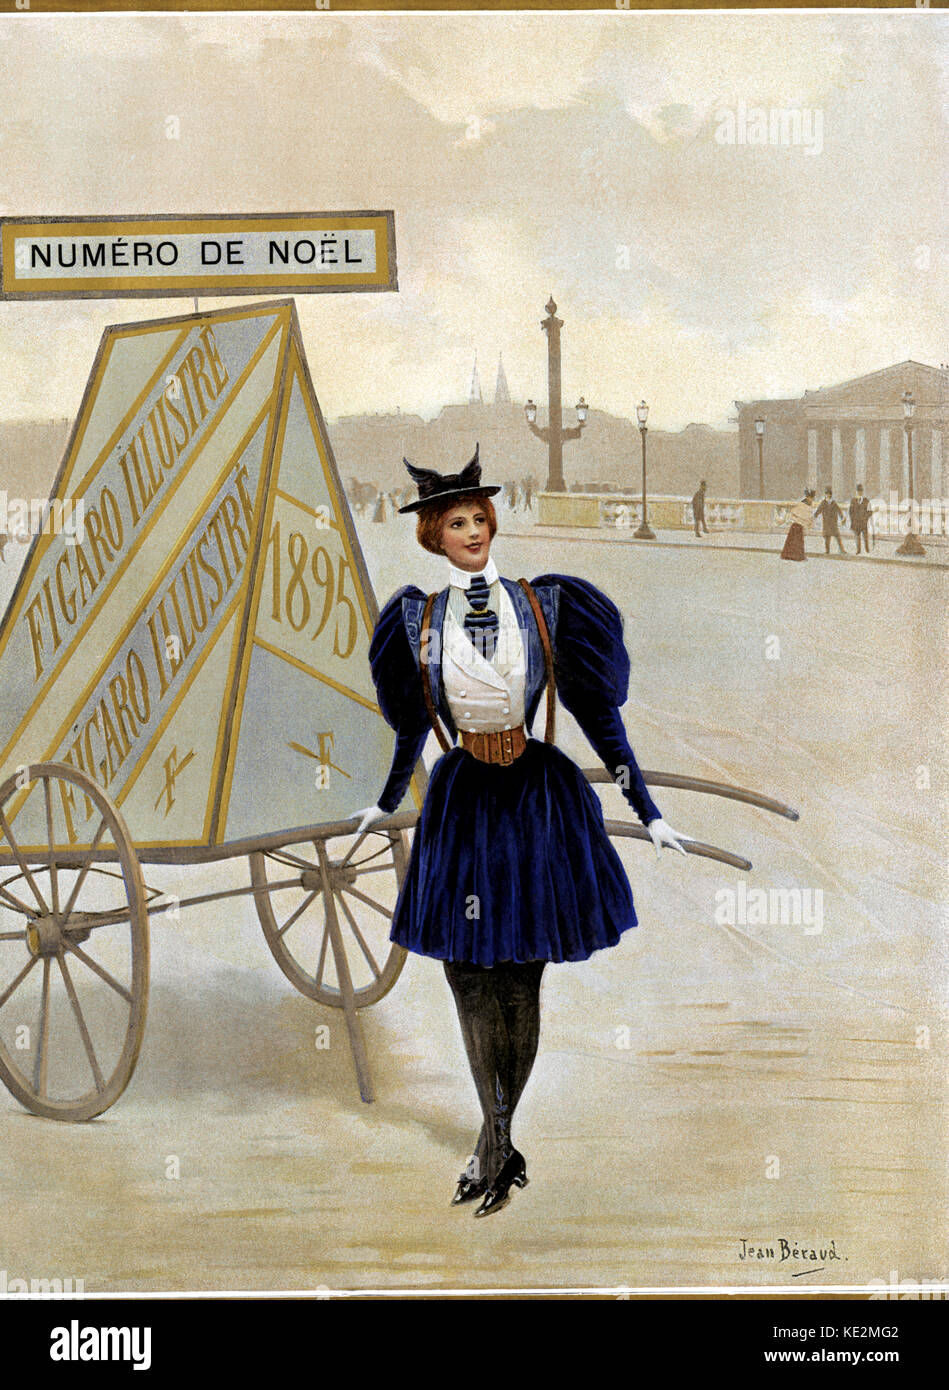 Young woman wearing late 19th century dress with leg of mutton sleeves, decorated tights/stockings, a cravat, a hat and gloves. Cover of Figaro Illustré 'Numéro de Noël', 1895. She is leaning against a mobile advertising board on Place de la Concorde (Paris).  Illustration by Jean Béraud (French painter 1849-1935). Stock Photo